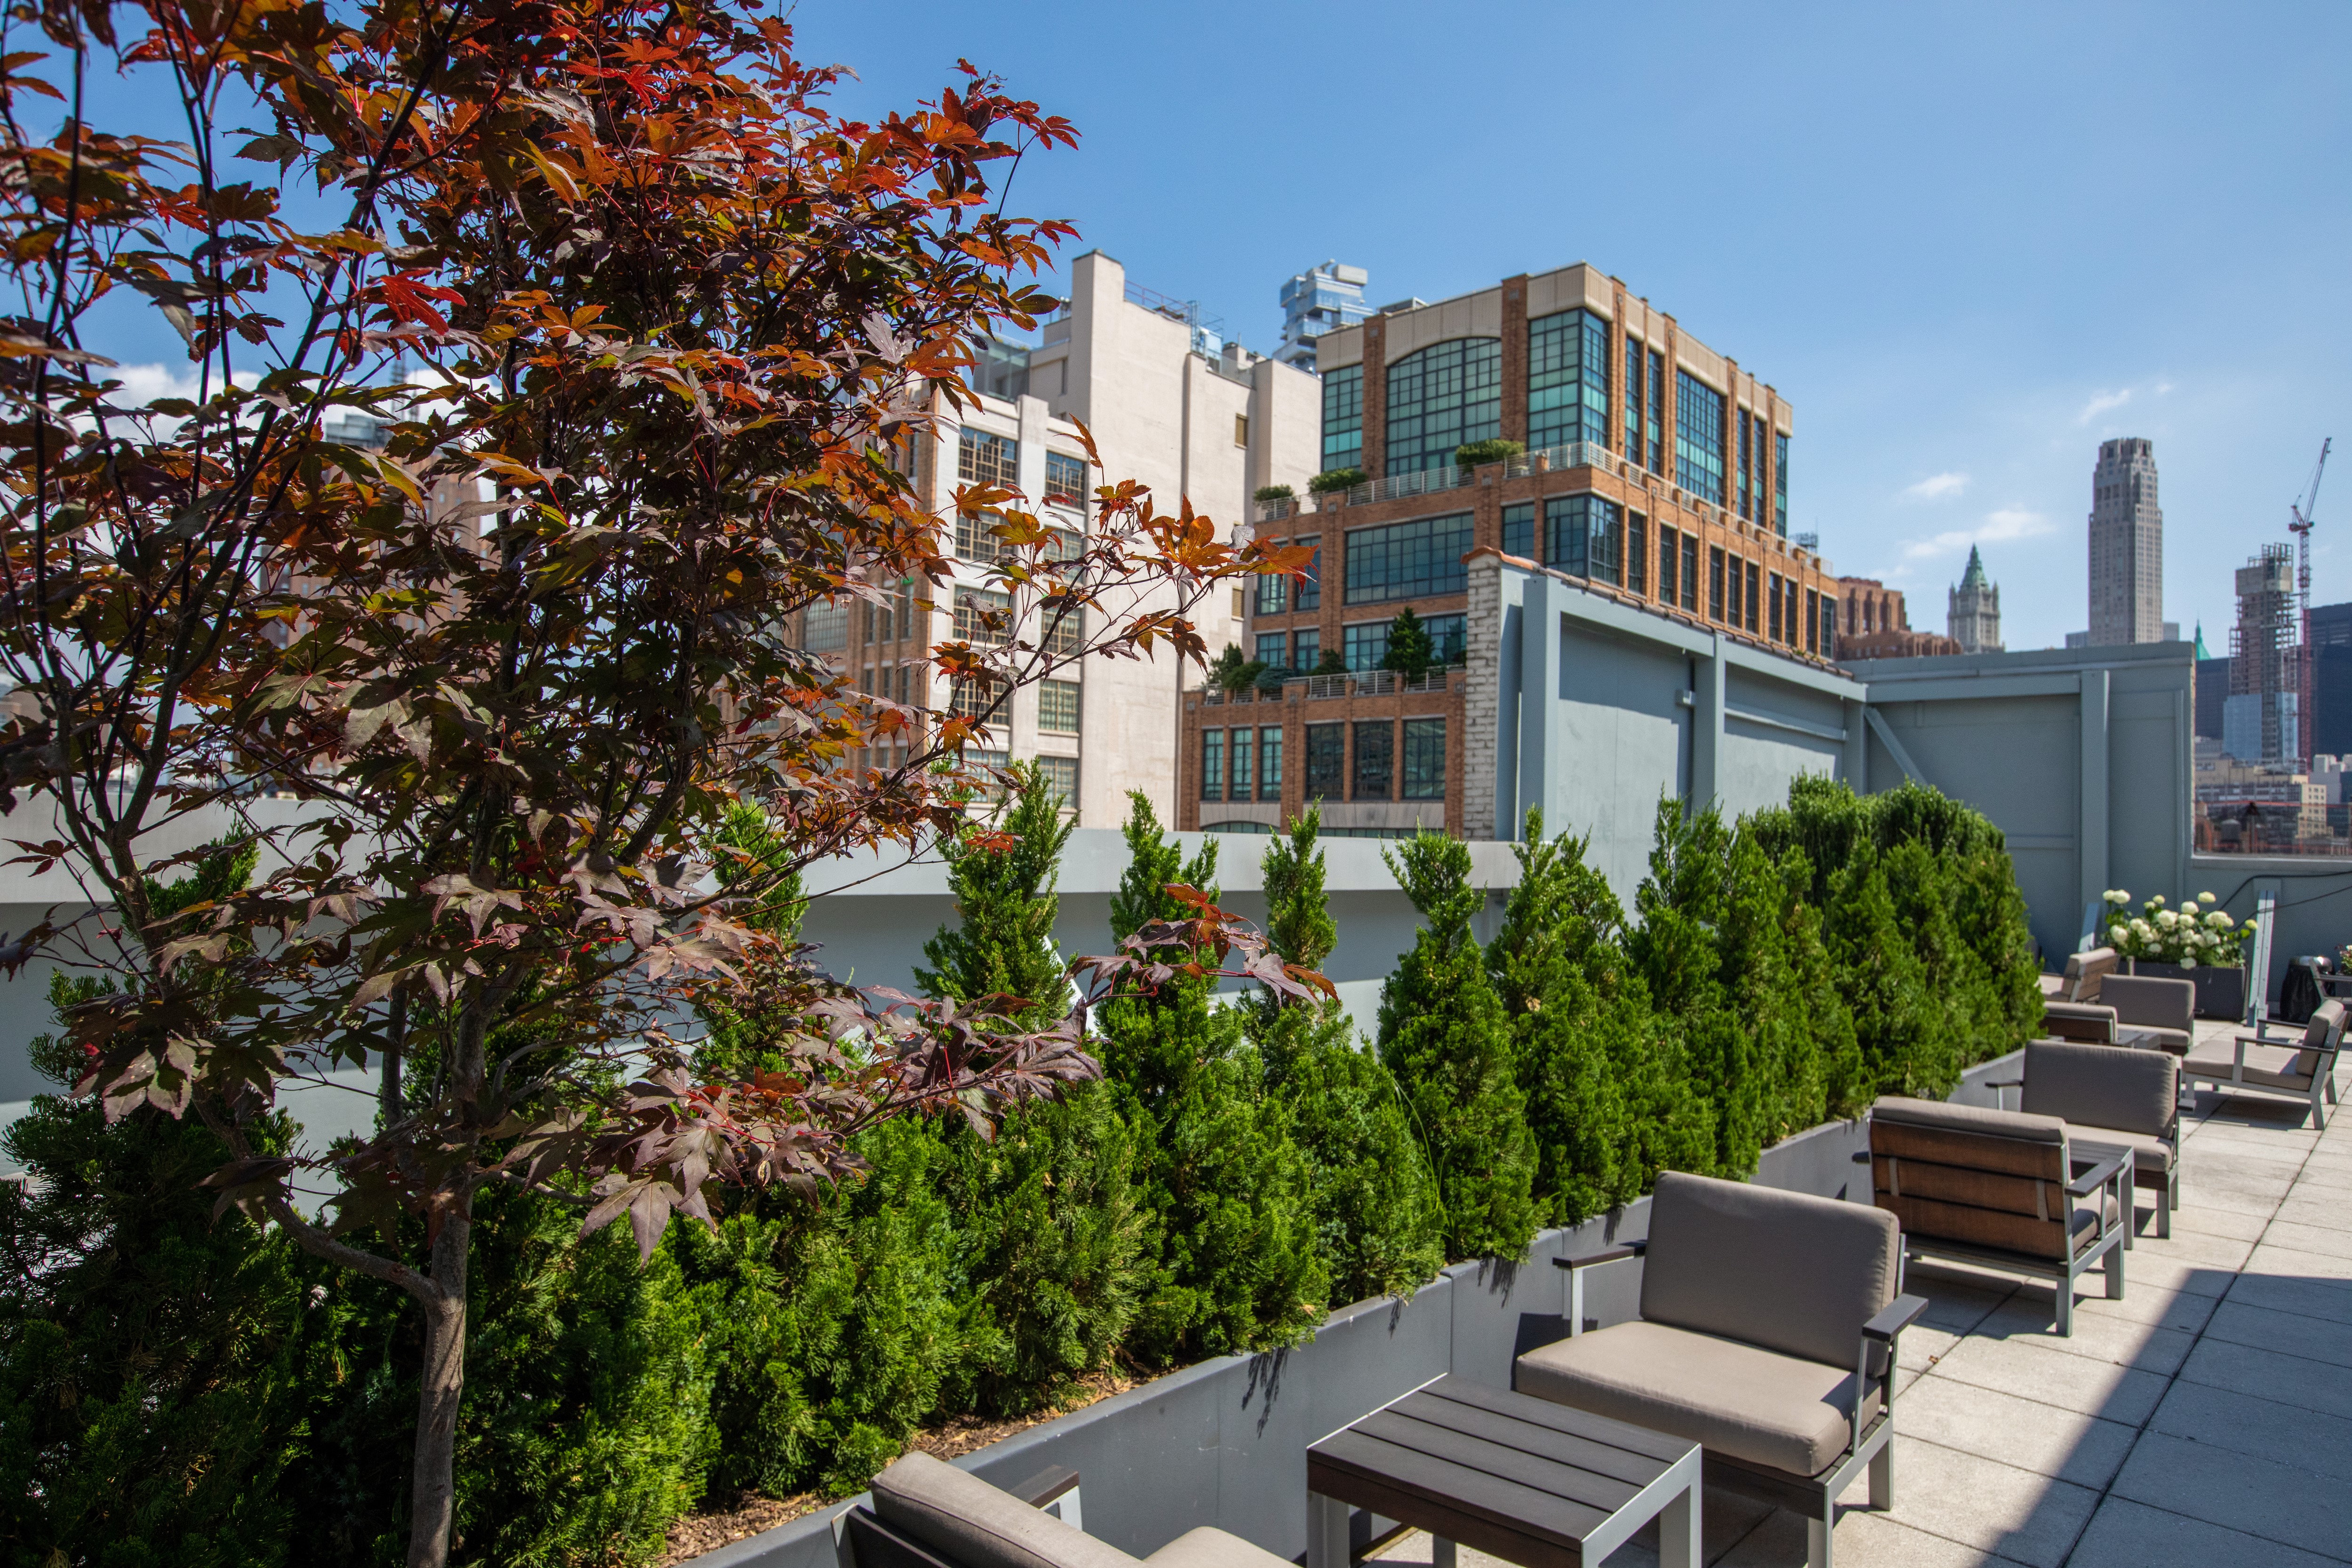 The rooftop becomes a canvas of tranquility, where a symphony of plants harmonizes with the bustling city below.